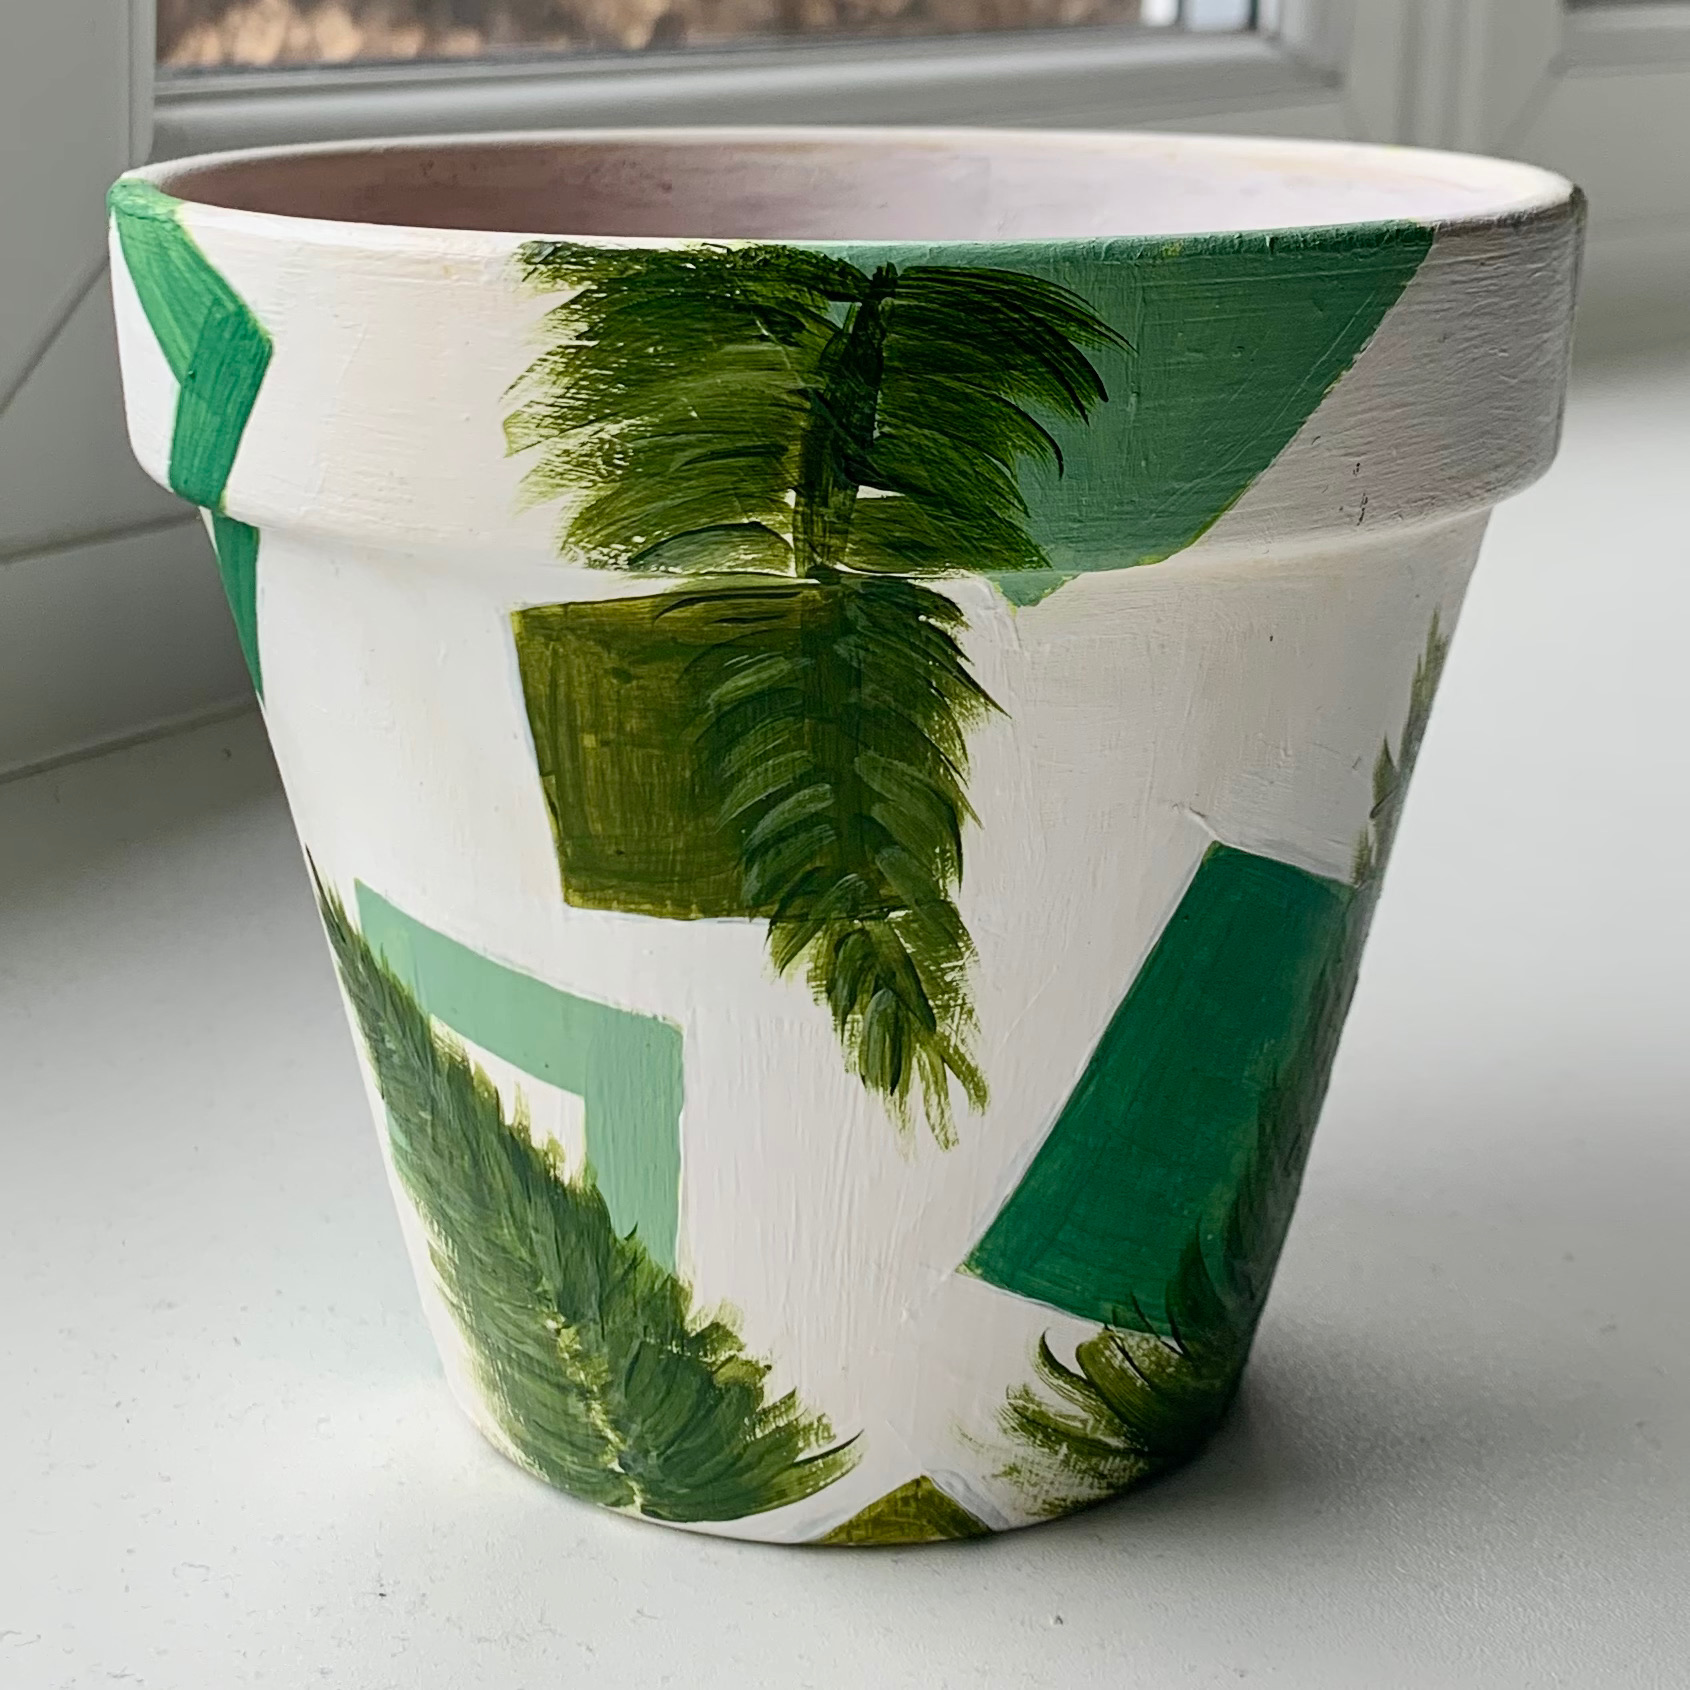 One of the pots I was commissioned to paint when I had my etsy shop